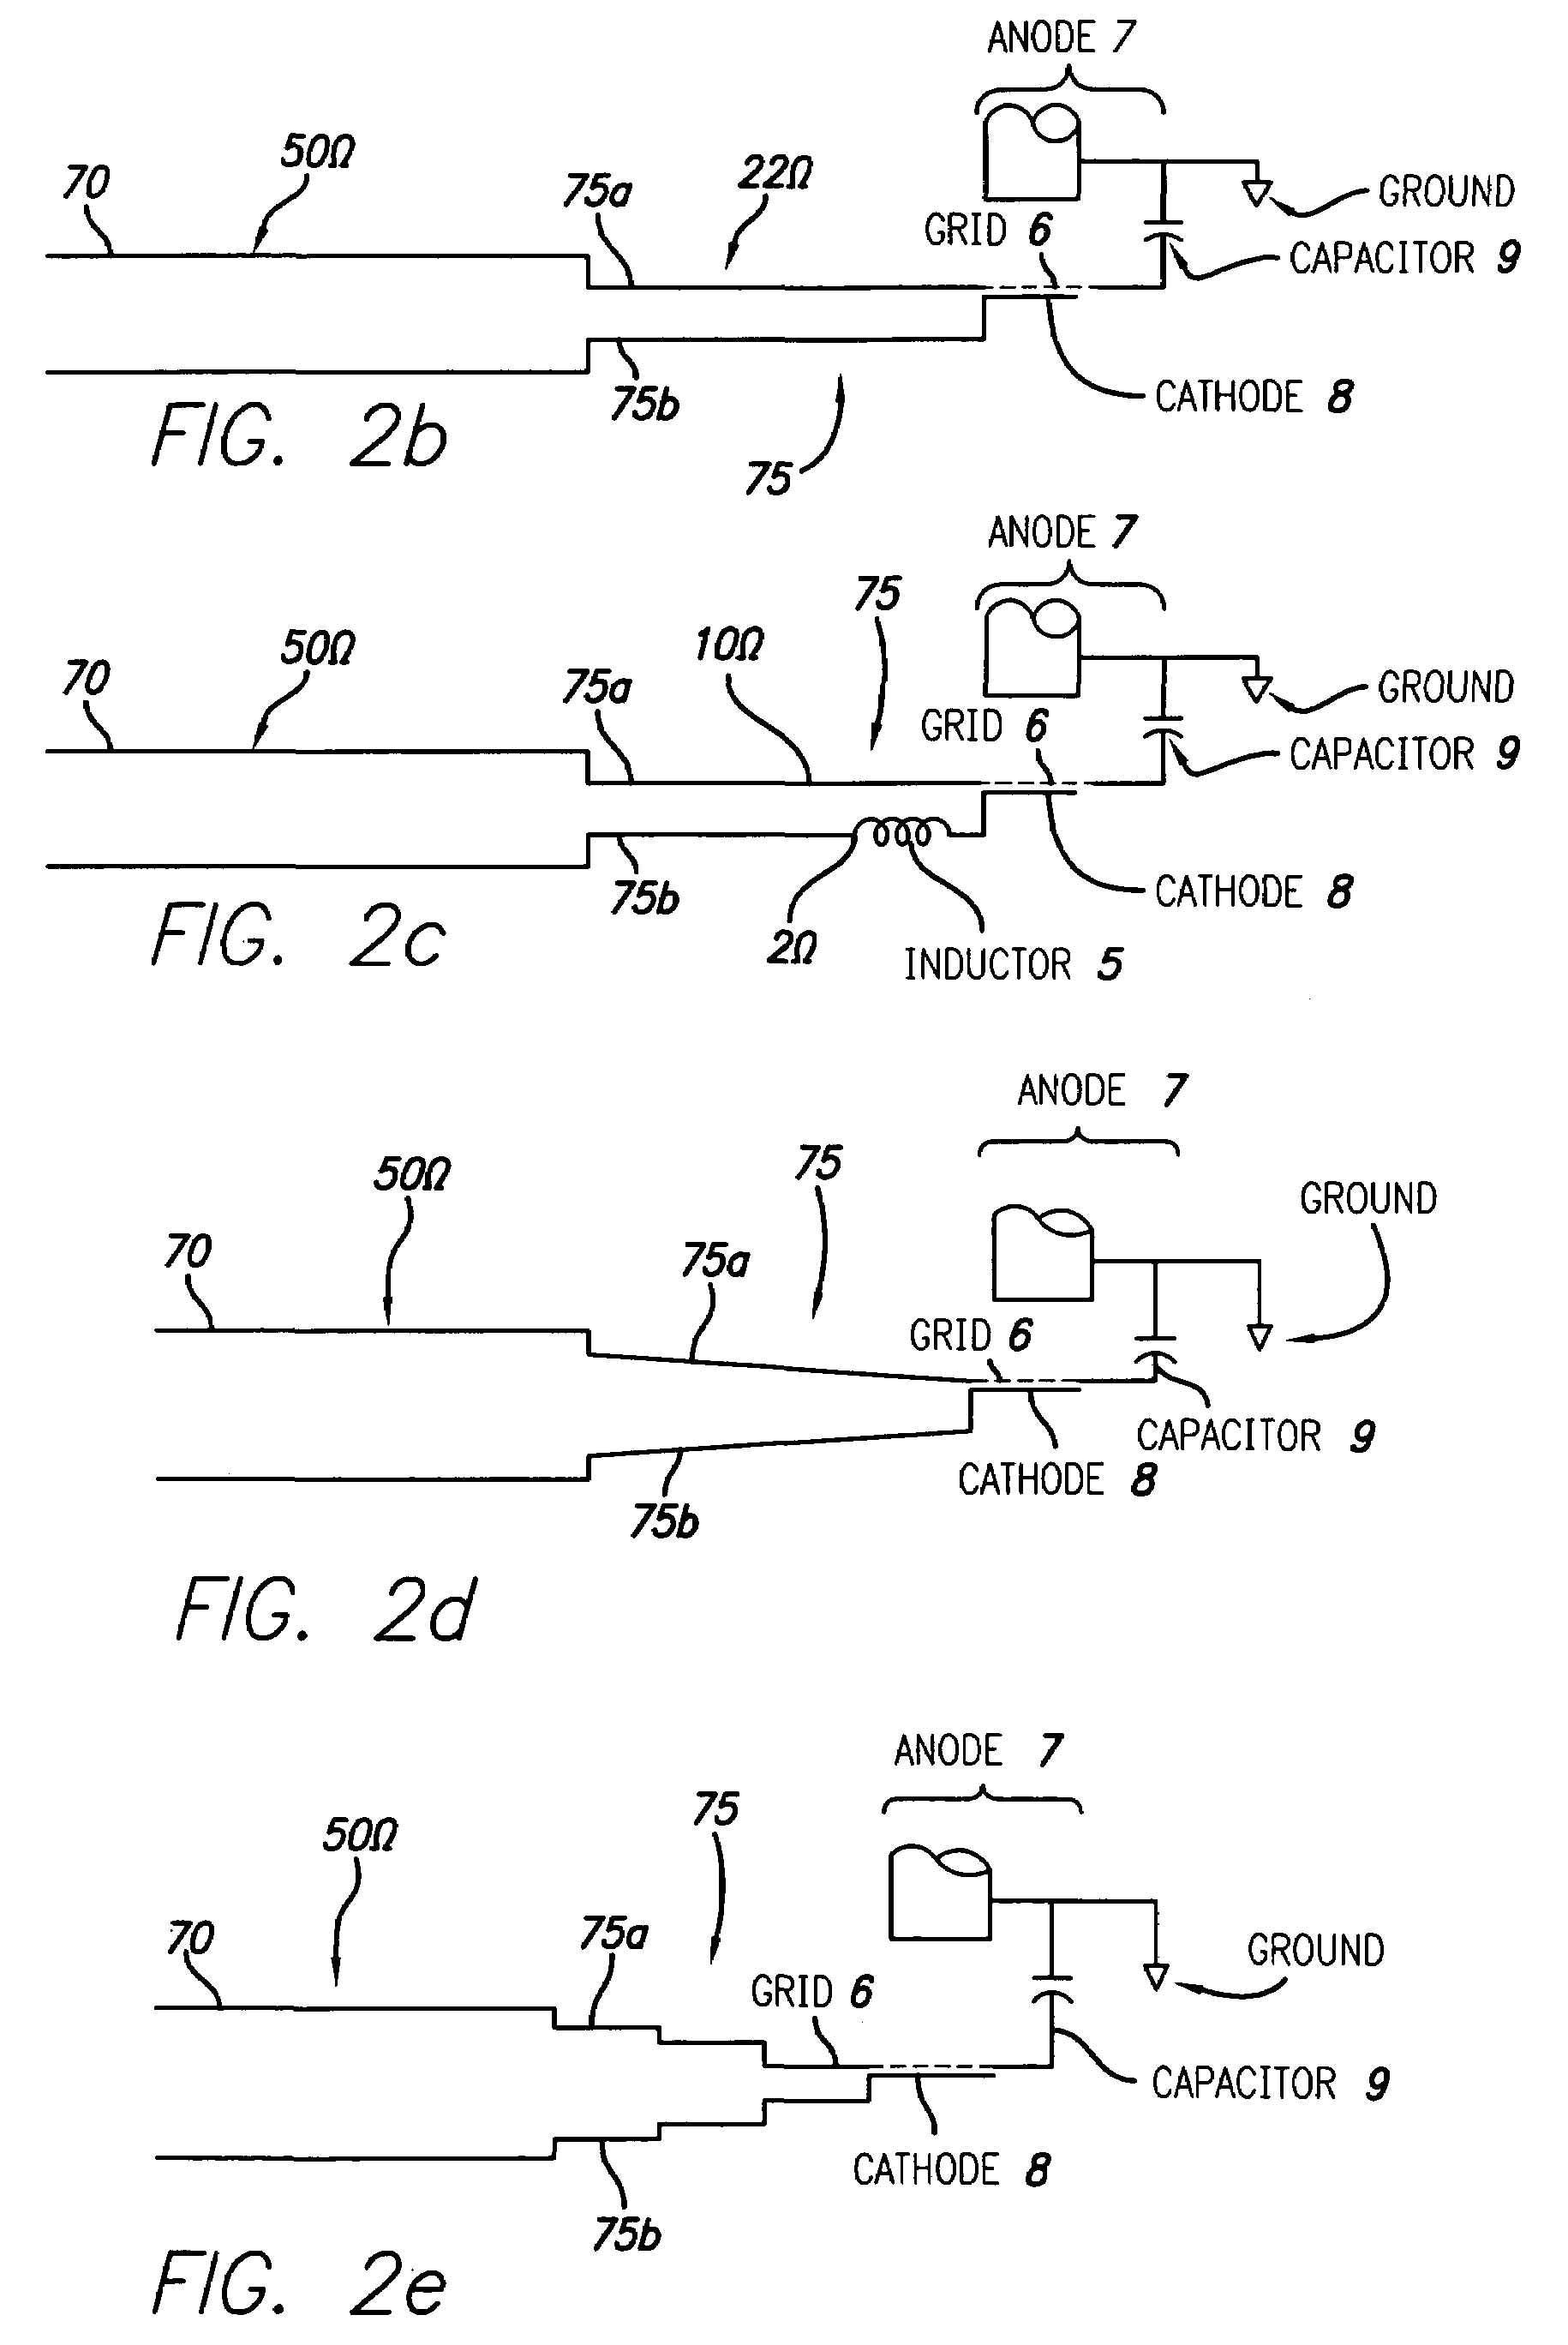 Inductive output tube having a broadband impedance circuit